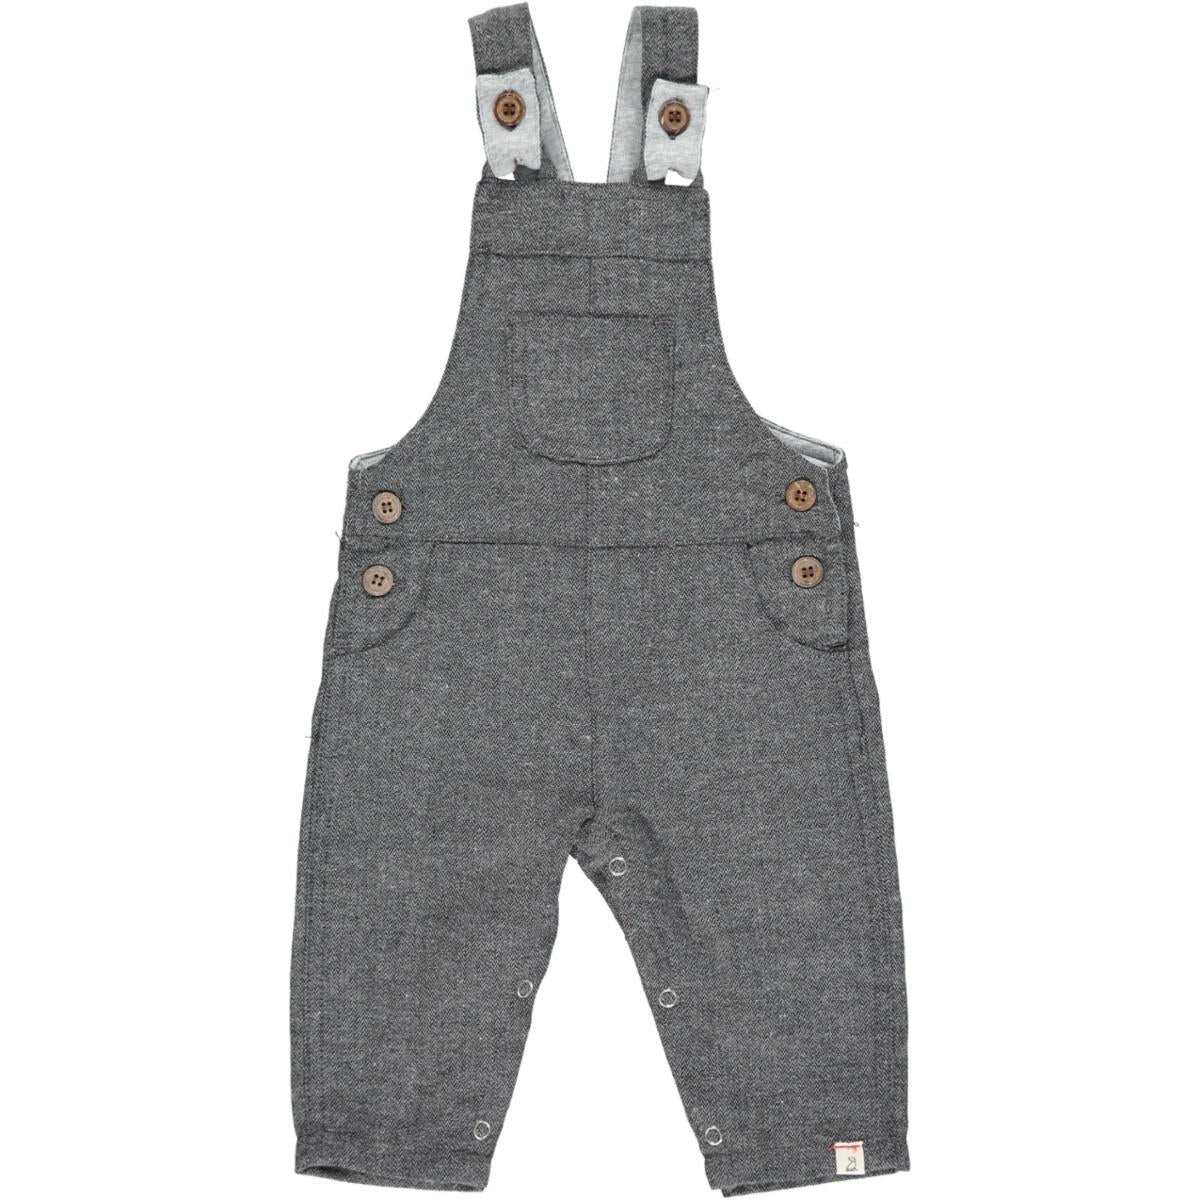 Woven Wool Overalls - Black